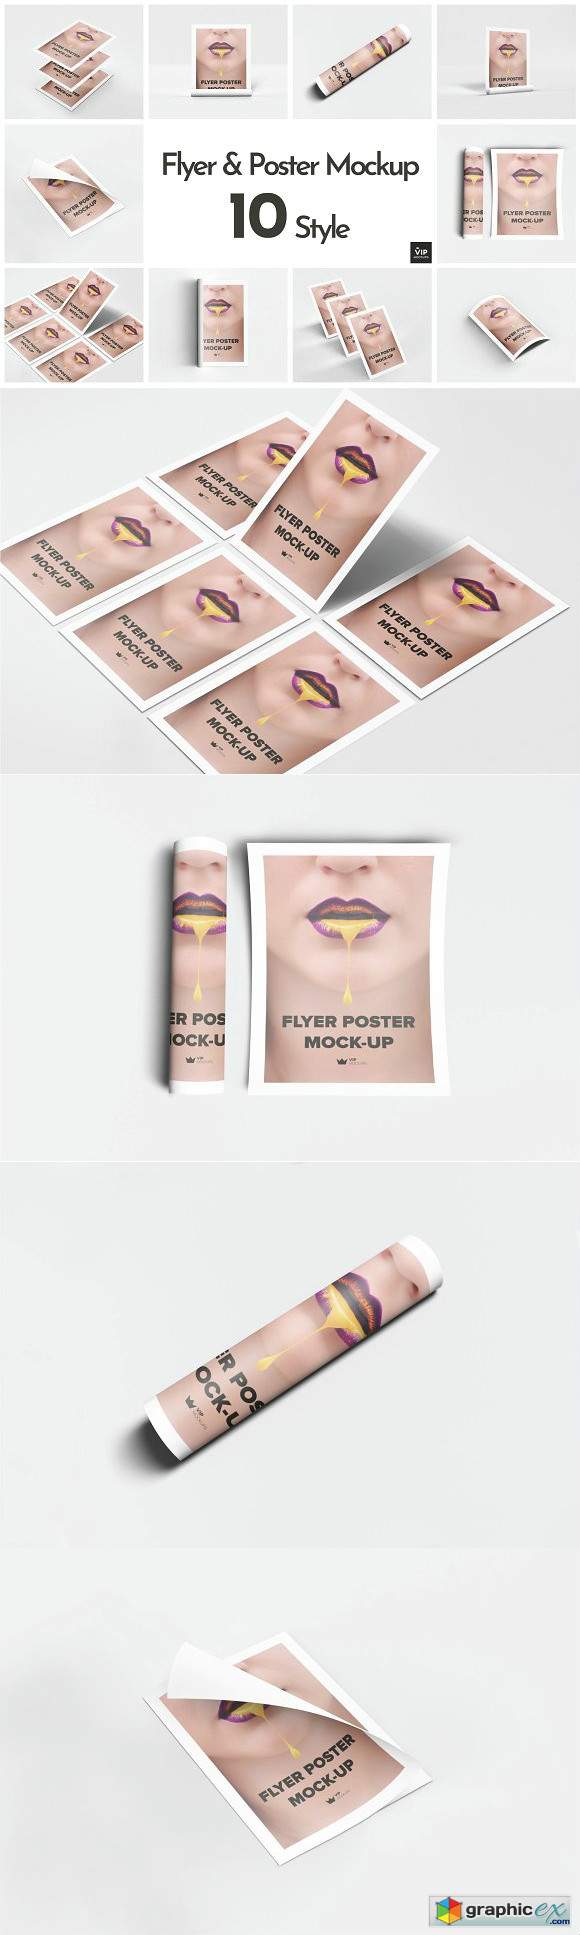 Flyer & Poster Mockup - 10 Style